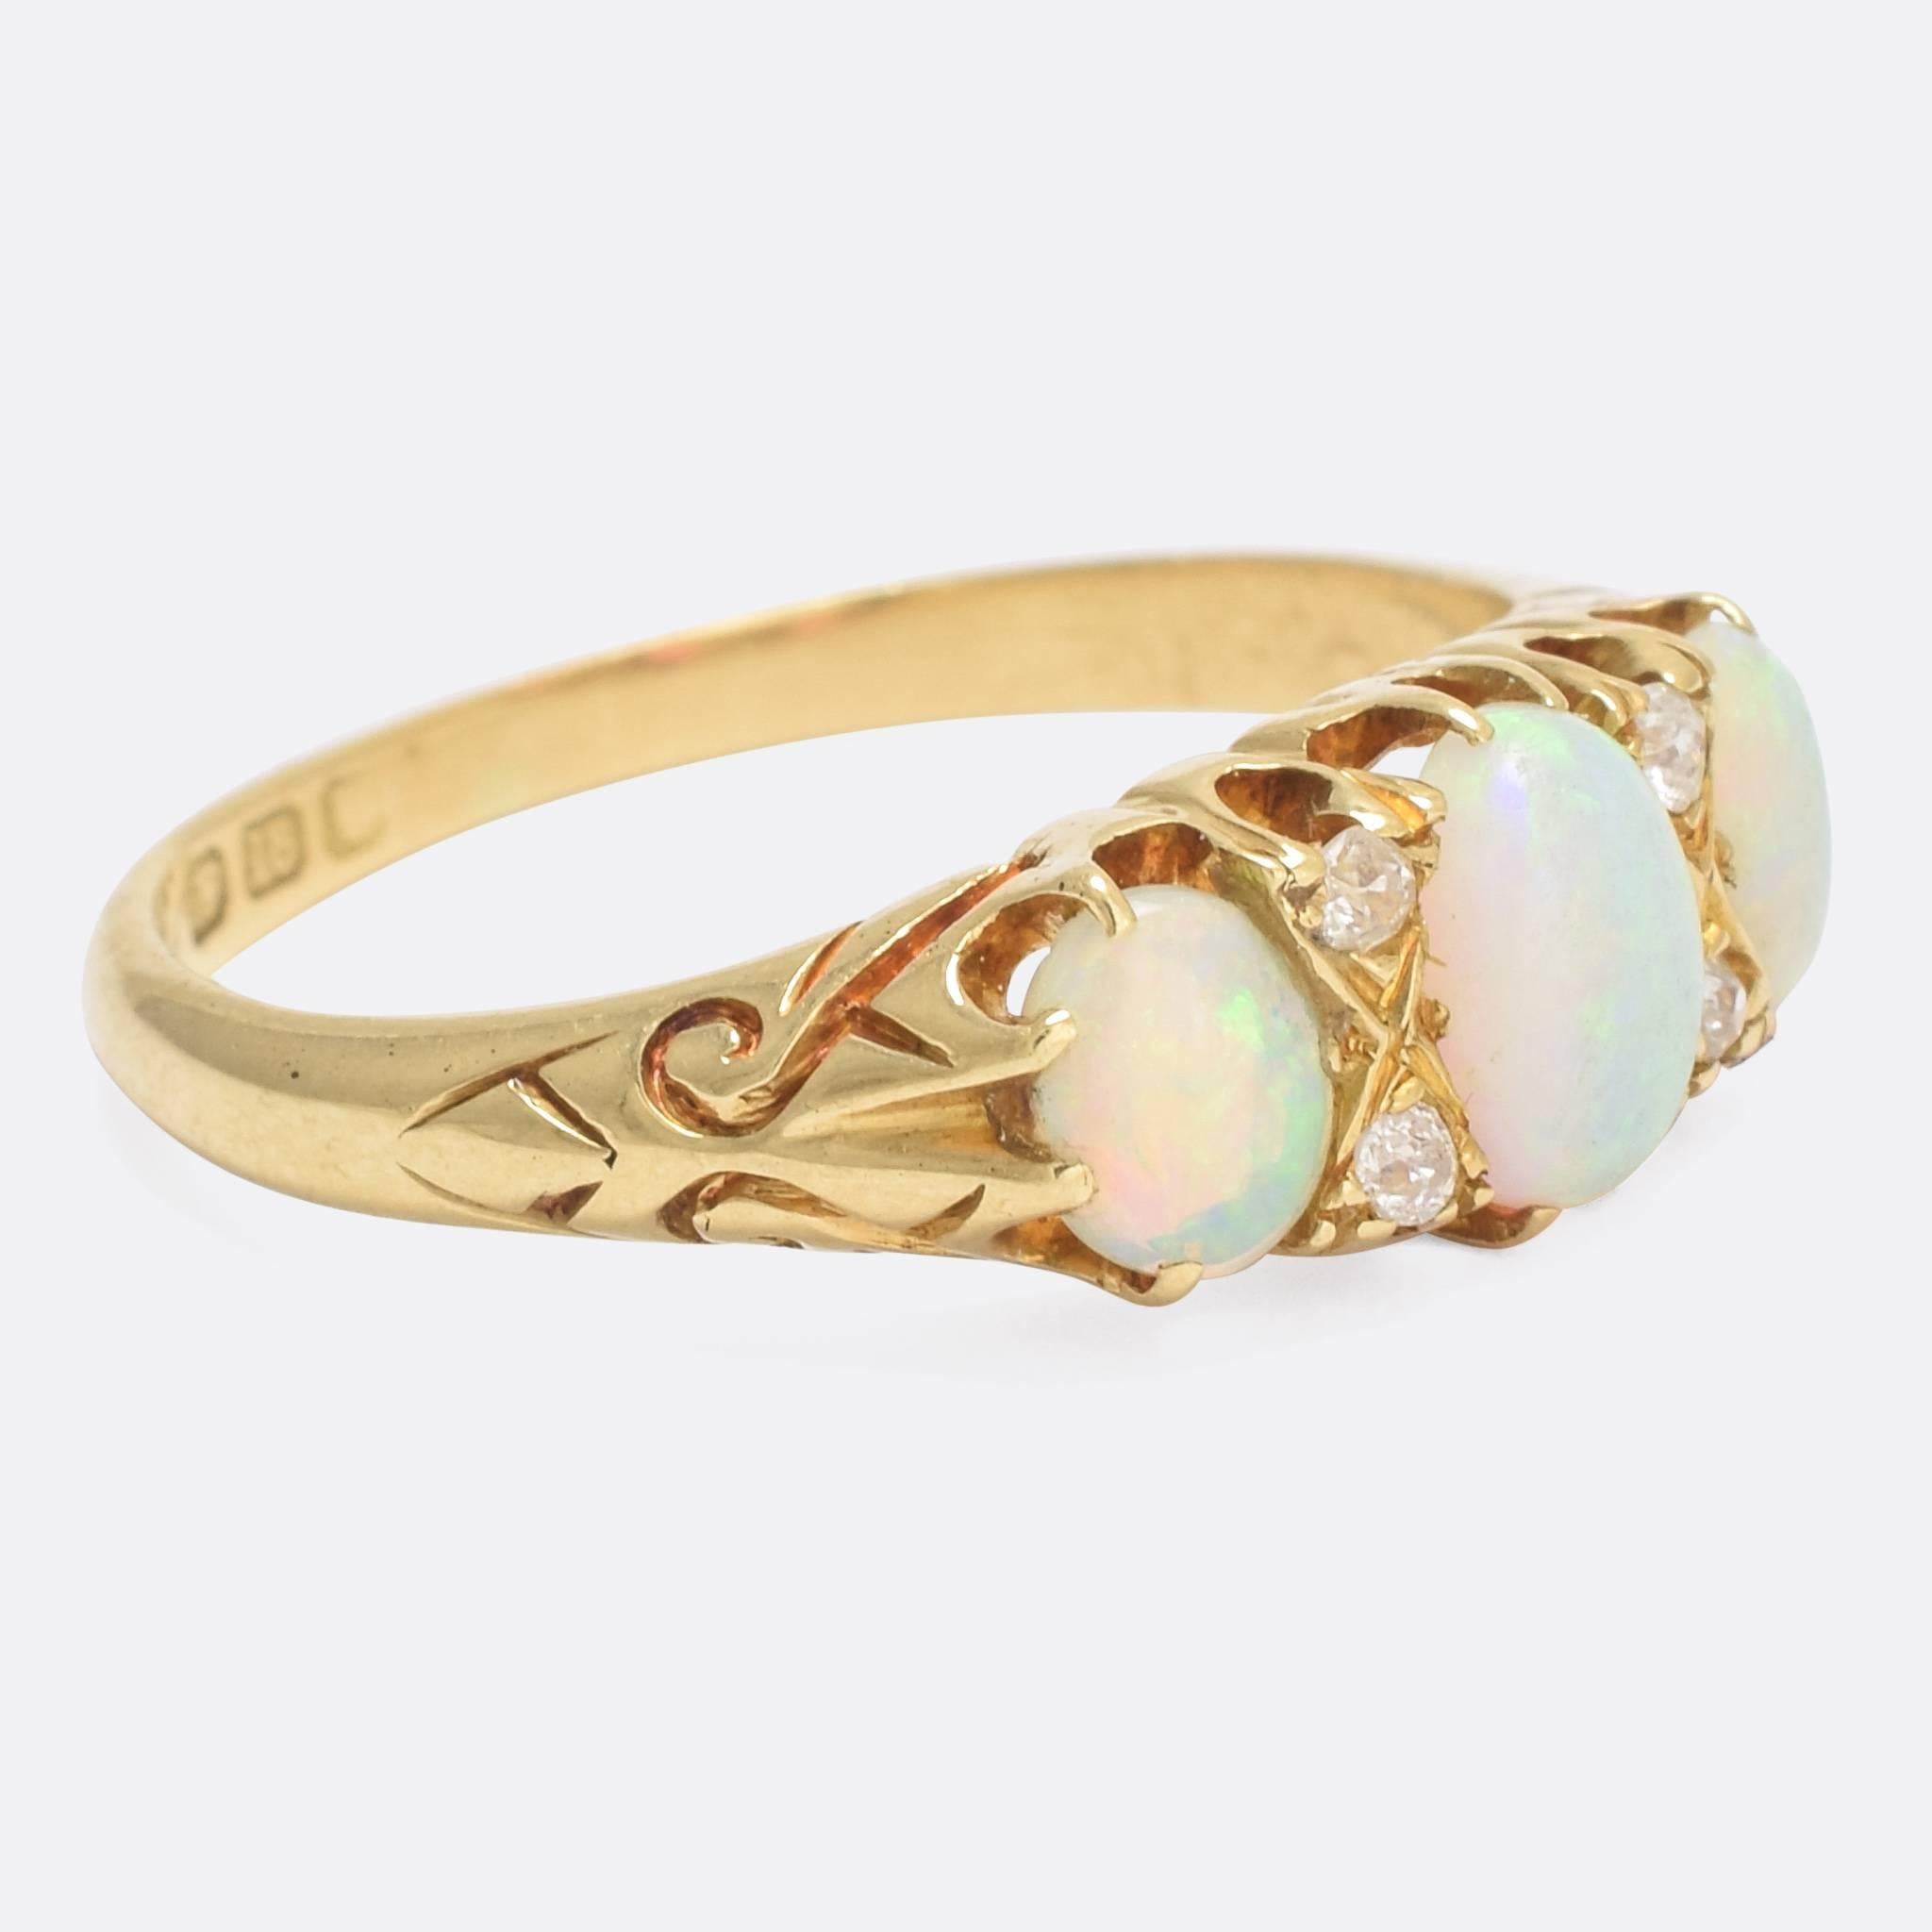 A particularly well formed antique opal and diamond gypsy ring, with deeply chased detailing and elegant fine claw mounts. It's modelled in 18k yellow gold, and dates to the 1880s.

STONES
Natural Opals and Old Mine cut Diamonds

RING SIZE
7.5